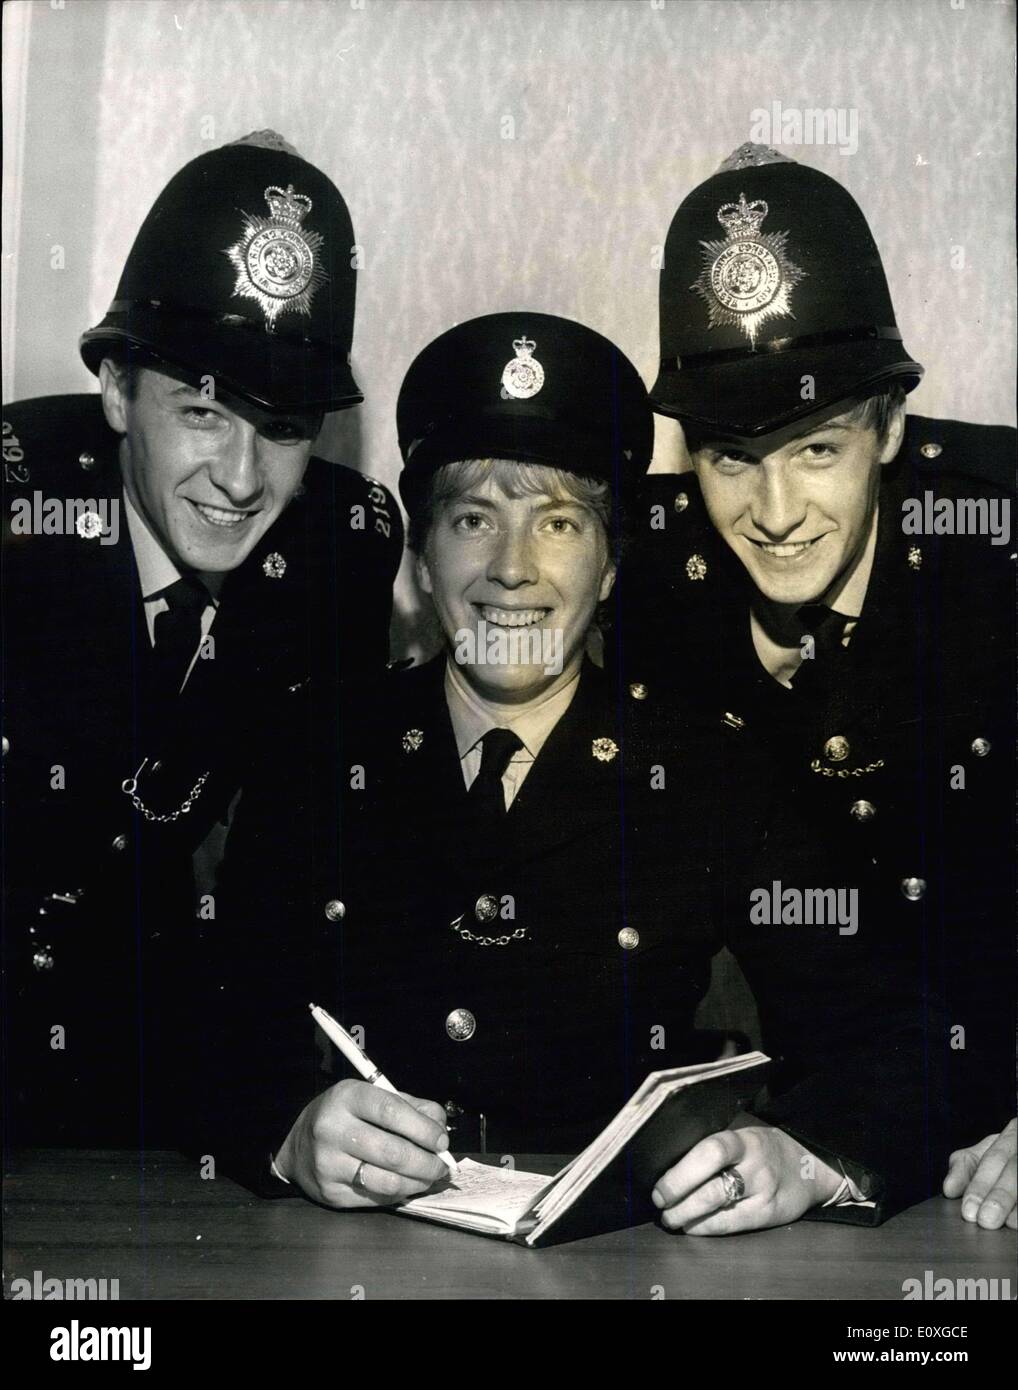 Sep. 16, 1966 - Policewoman Recruiting The Family. The Soft persuasive voice of pretty Joan Williamson is boosting the establishment of the West Riding constabulary - for Joan is talking her whole family into joining the force. When the second of her 19 year old identical twin brother was sworn in at Wakefield (Sept 13) as a constable Joan was there to welcome him into the fold. Now Joan, her twin brothers, and her husband are all serving in the West Riding police Stock Photo